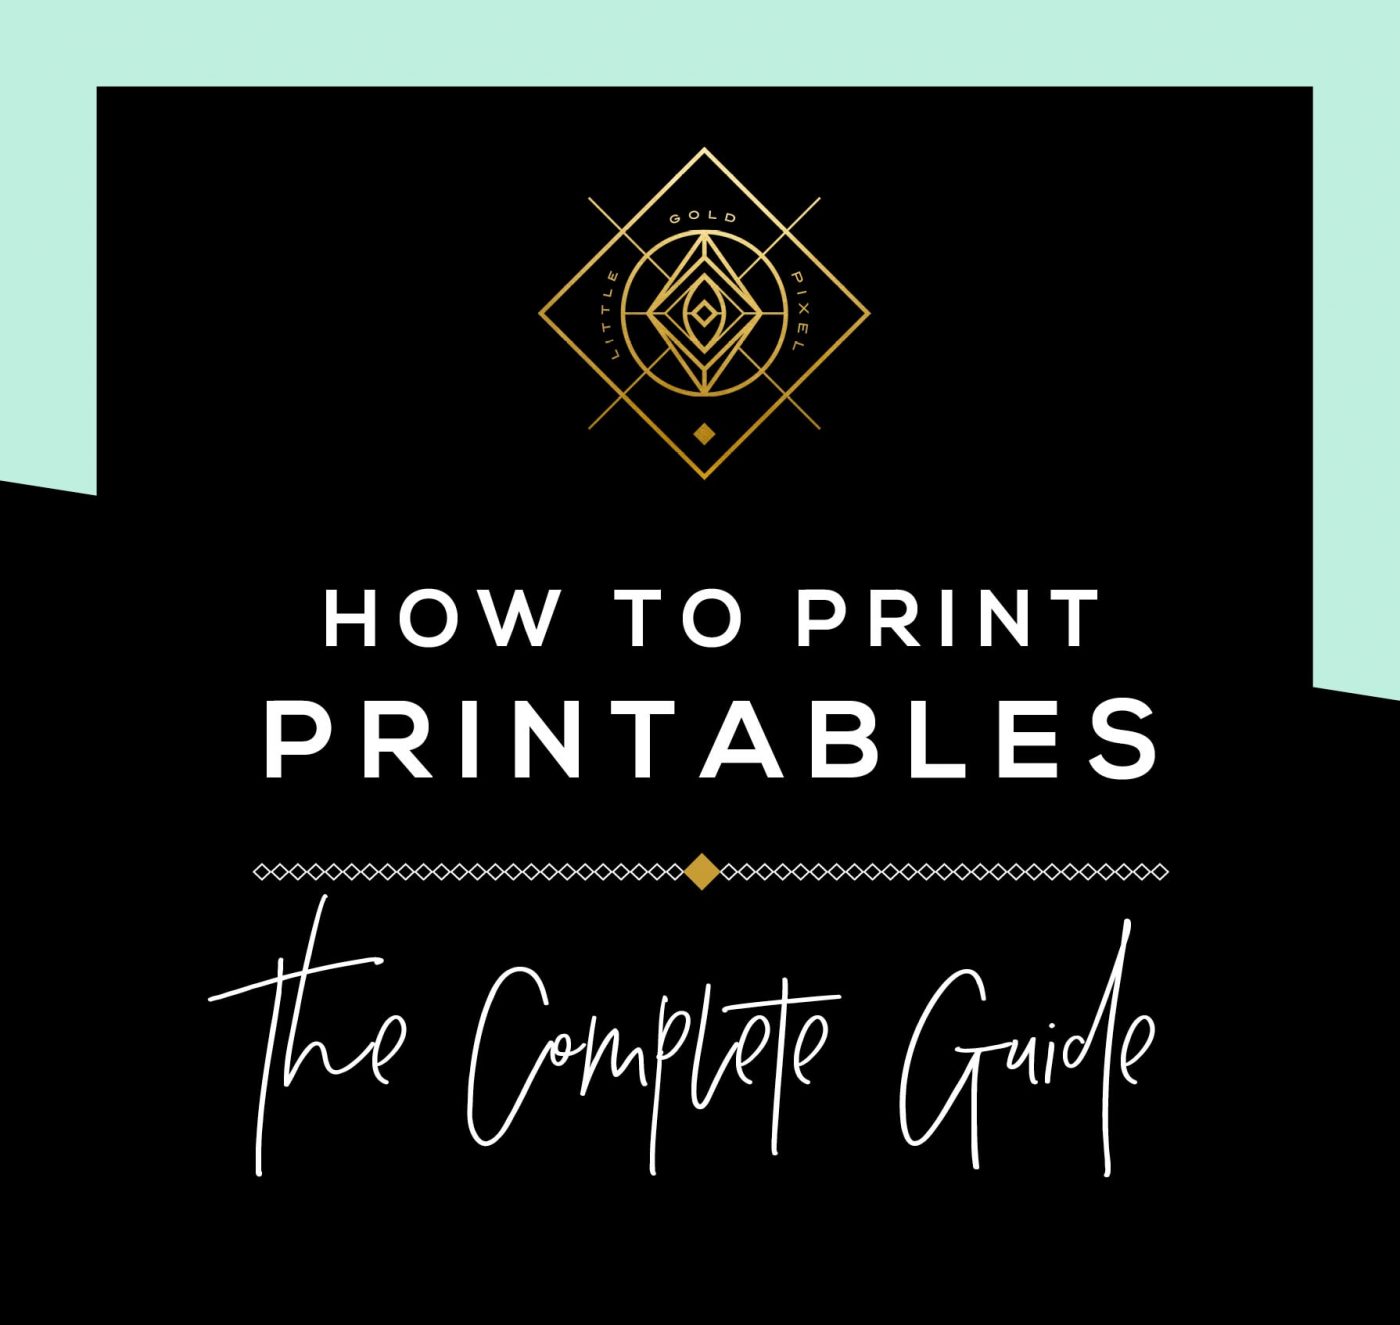 How to Print Printables: The Complete Guide